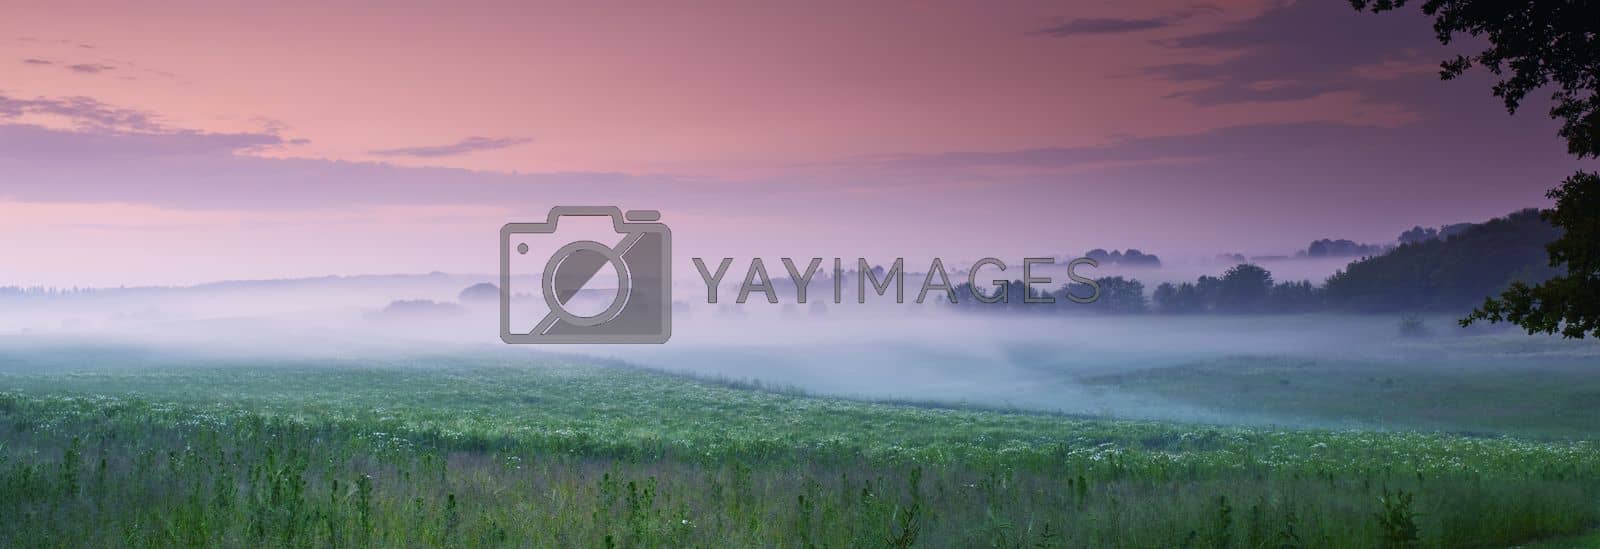 Royalty free image of Misty morning. Fog hanging over a green Danish landscape at dawn - Denmark. by YuriArcurs